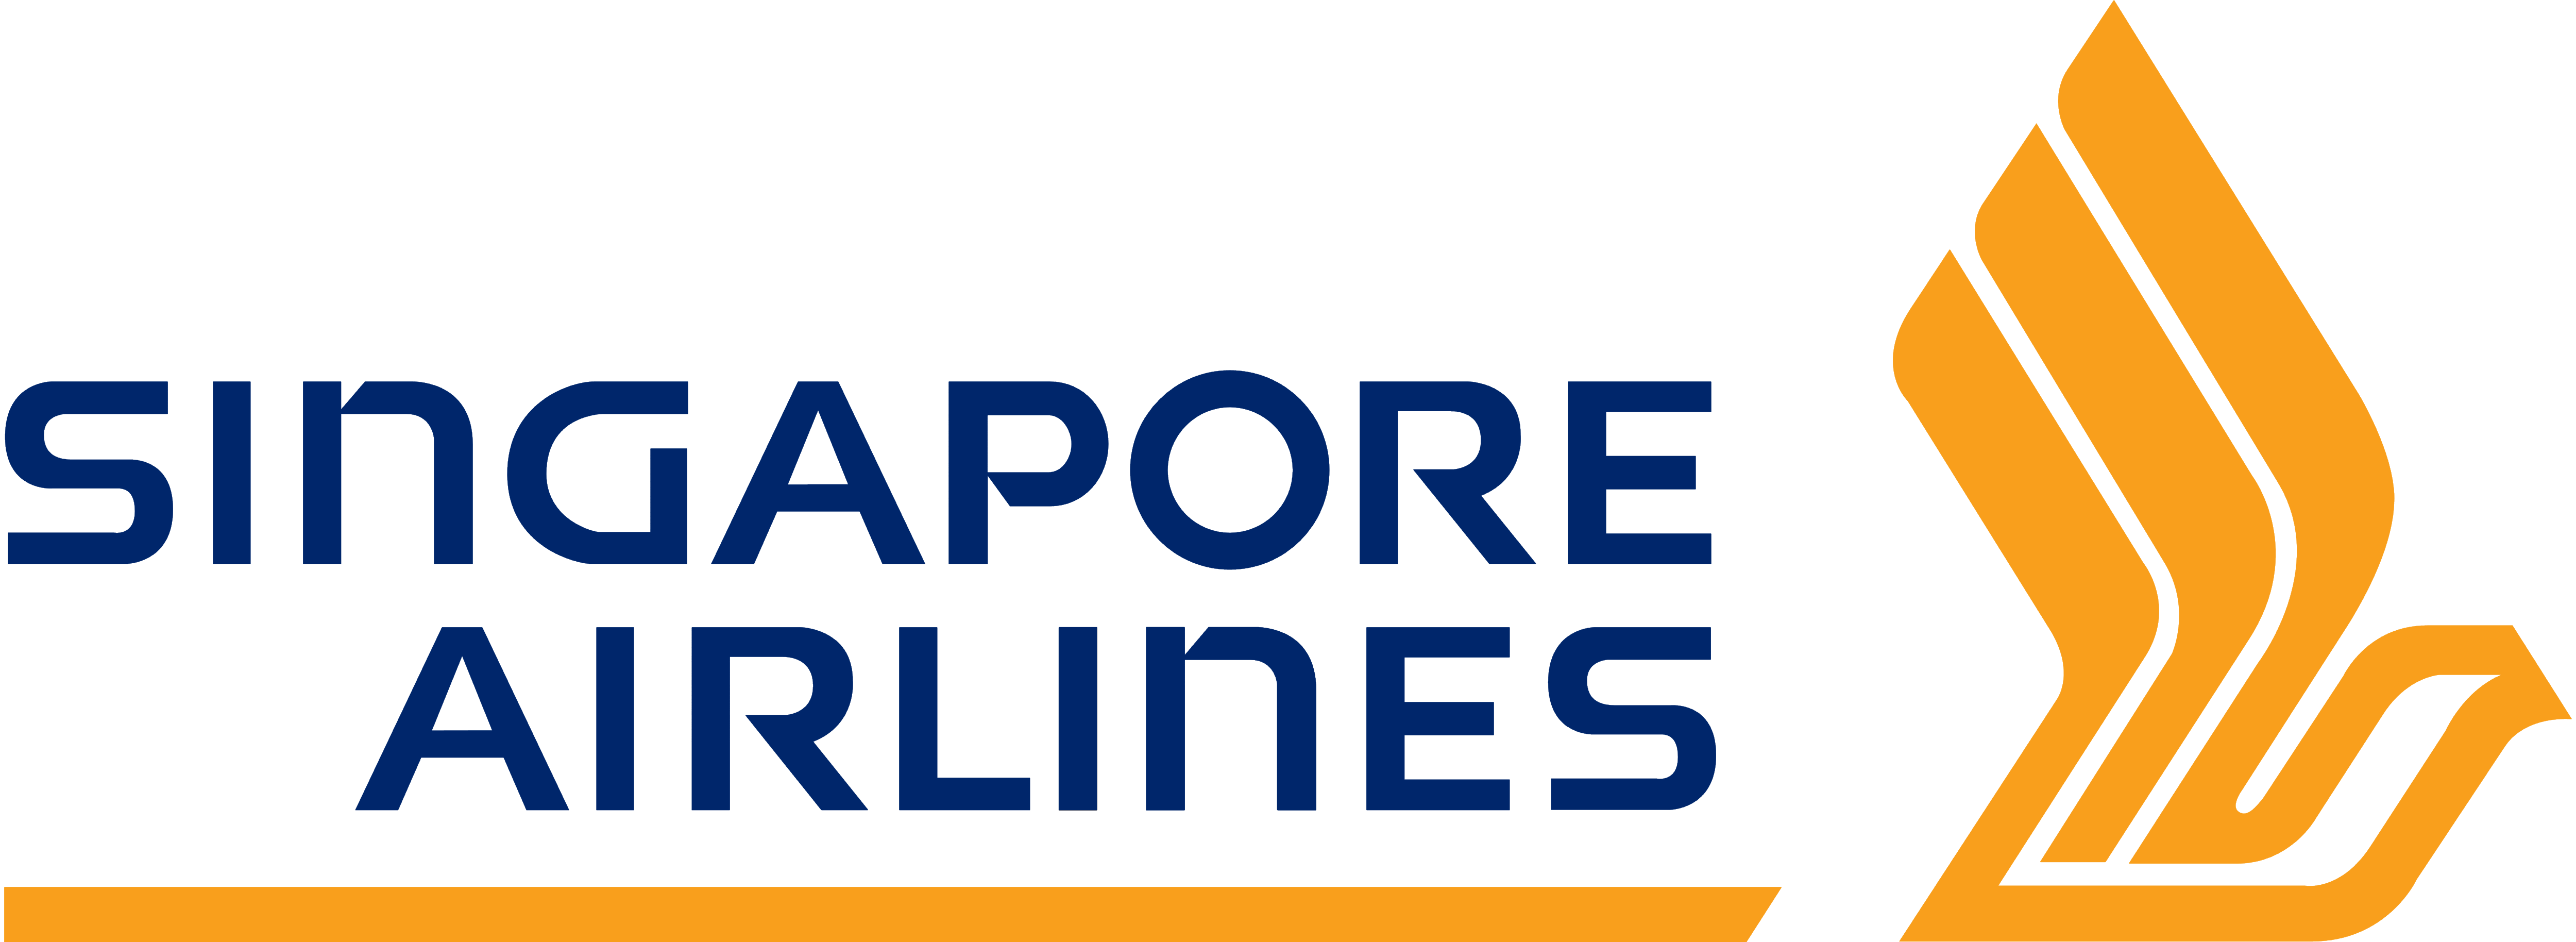 Singapore Airlines – Logos Download